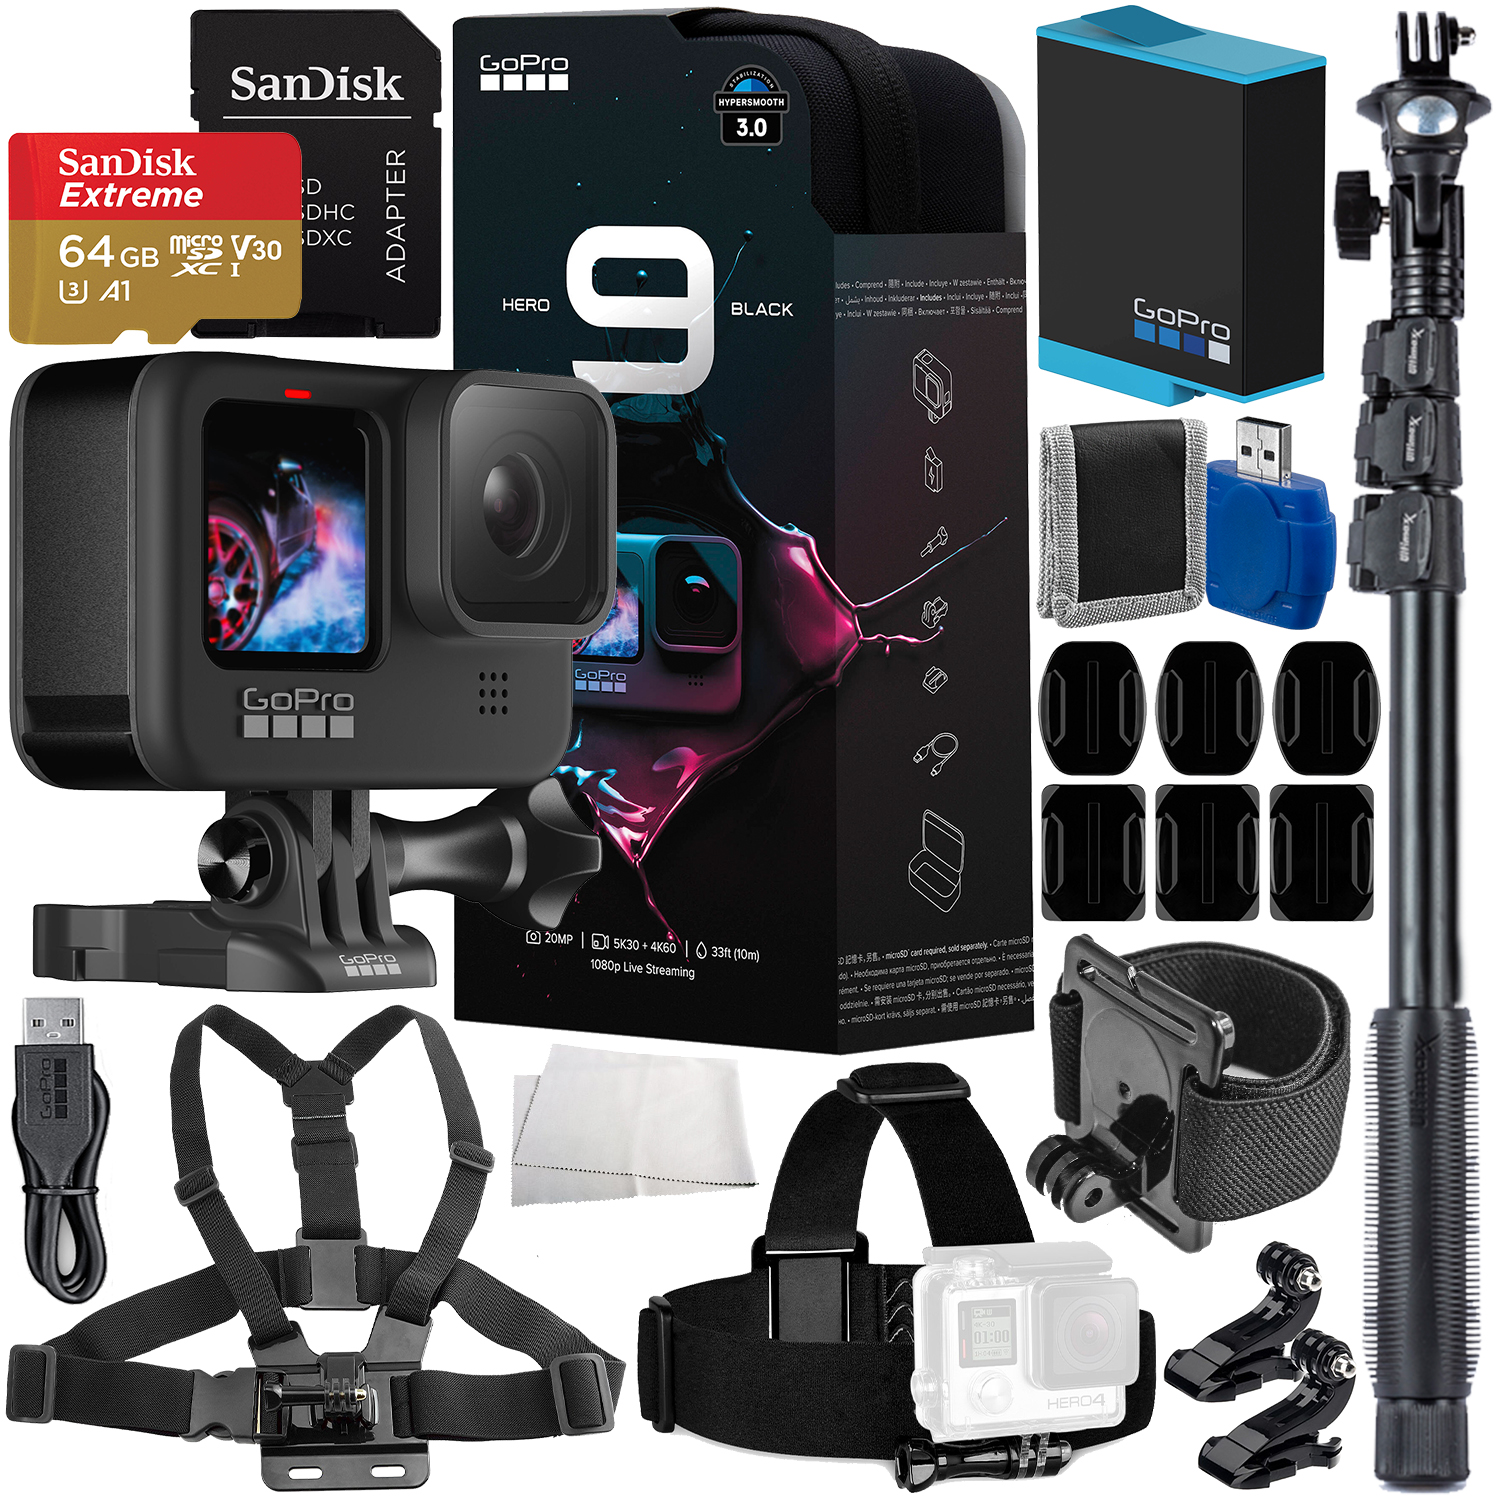 GoPro HERO9 (Hero 9) Action Camera (Black) with Starter Accessory Bundle - Includes: SanDisk Extreme 64GB microSDXC Memory Card, 48â? Selfie Stick / Monopod, Head Strap, Chest Strap, Wrist Strap & MORE